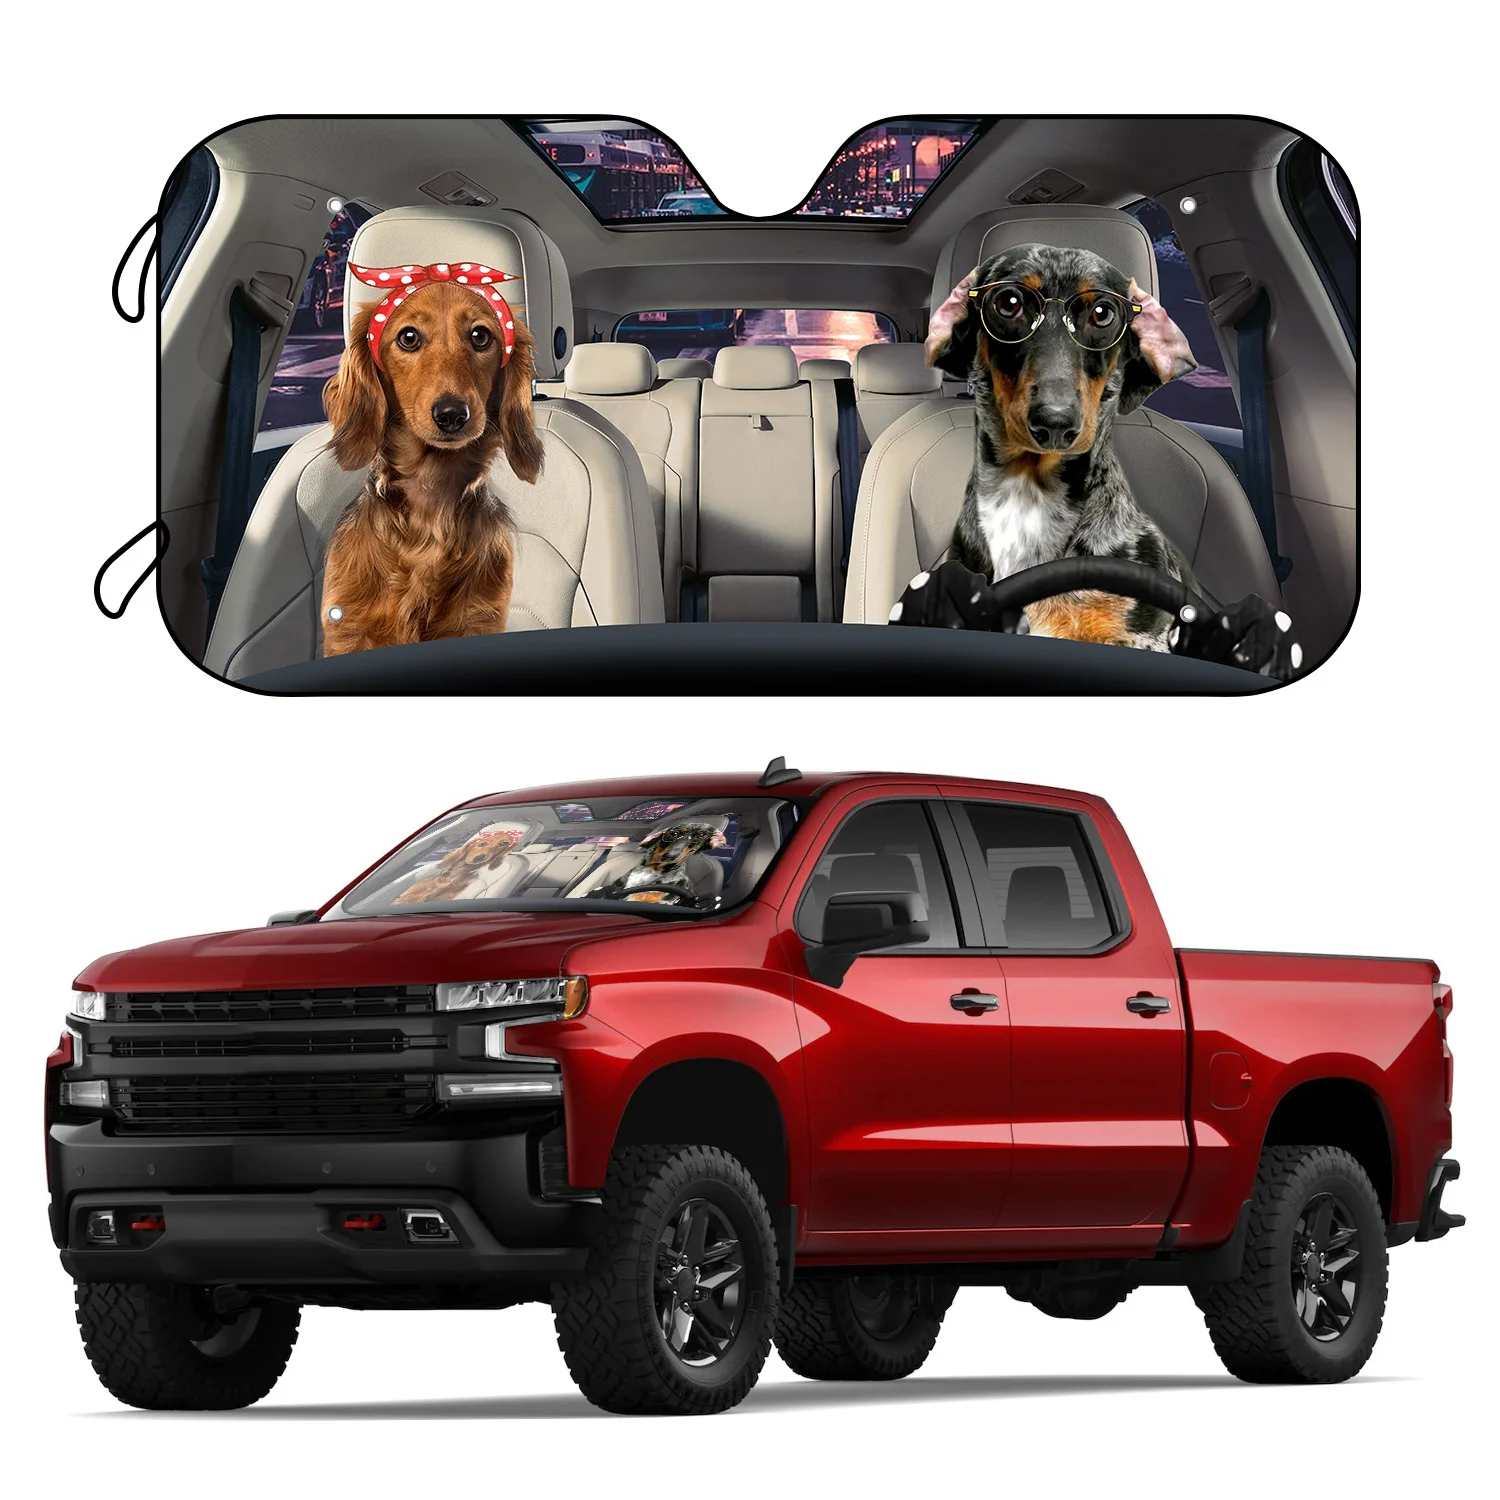 

Protect Your Pet from the Sun's Harmful Rays with this Foldable Windshield Sunshade!